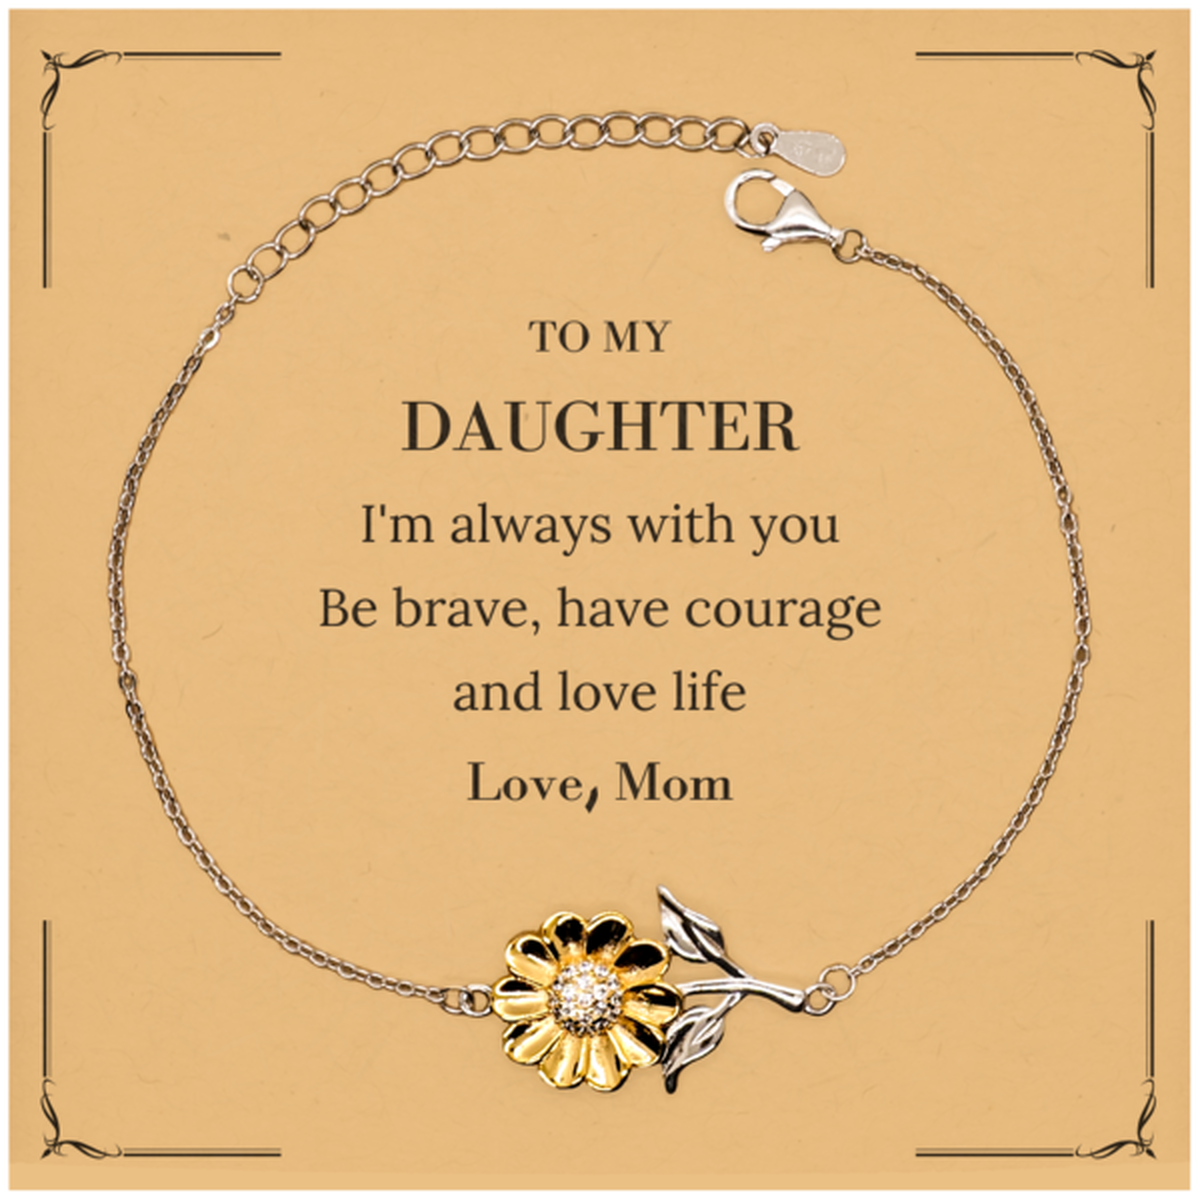 To My Daughter Gifts from Mom, Unique Sunflower Bracelet Inspirational Christmas Birthday Graduation Gifts for Daughter I'm always with you. Be brave, have courage and love life. Love, Mom